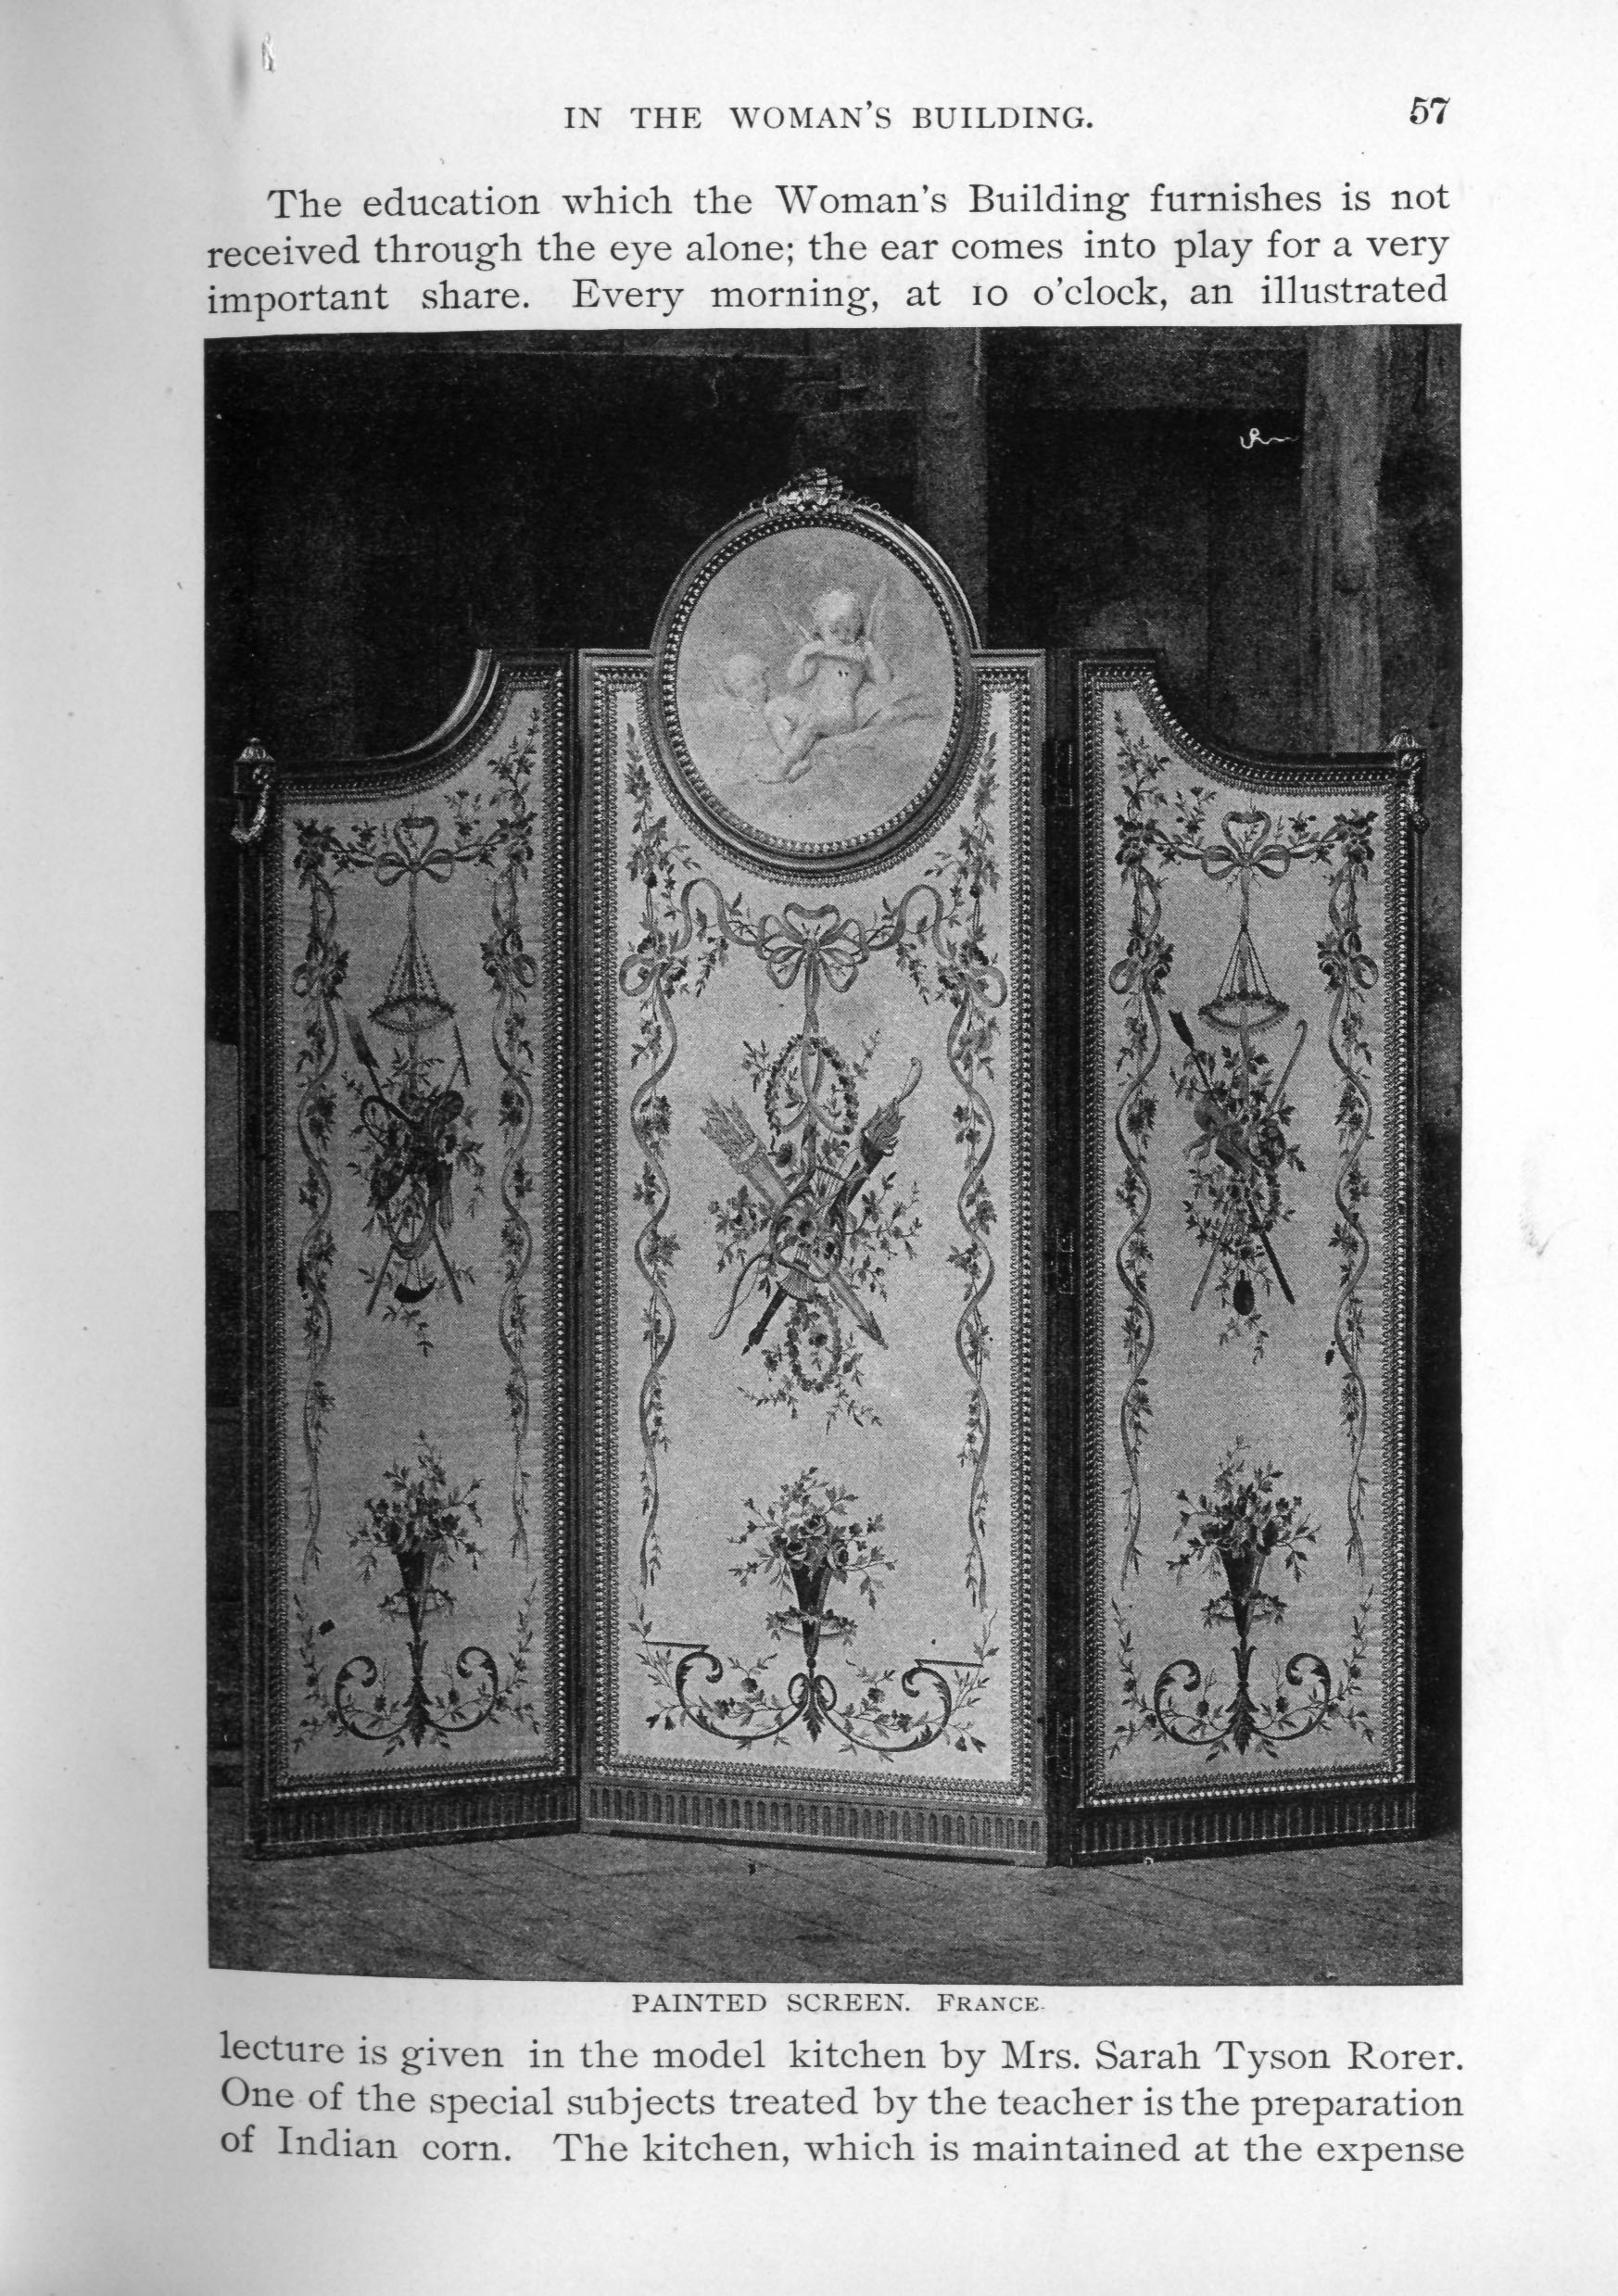 three-paneled screen ornately painted with putti, flower bouquets, and garland, quiver and arrows in middle section